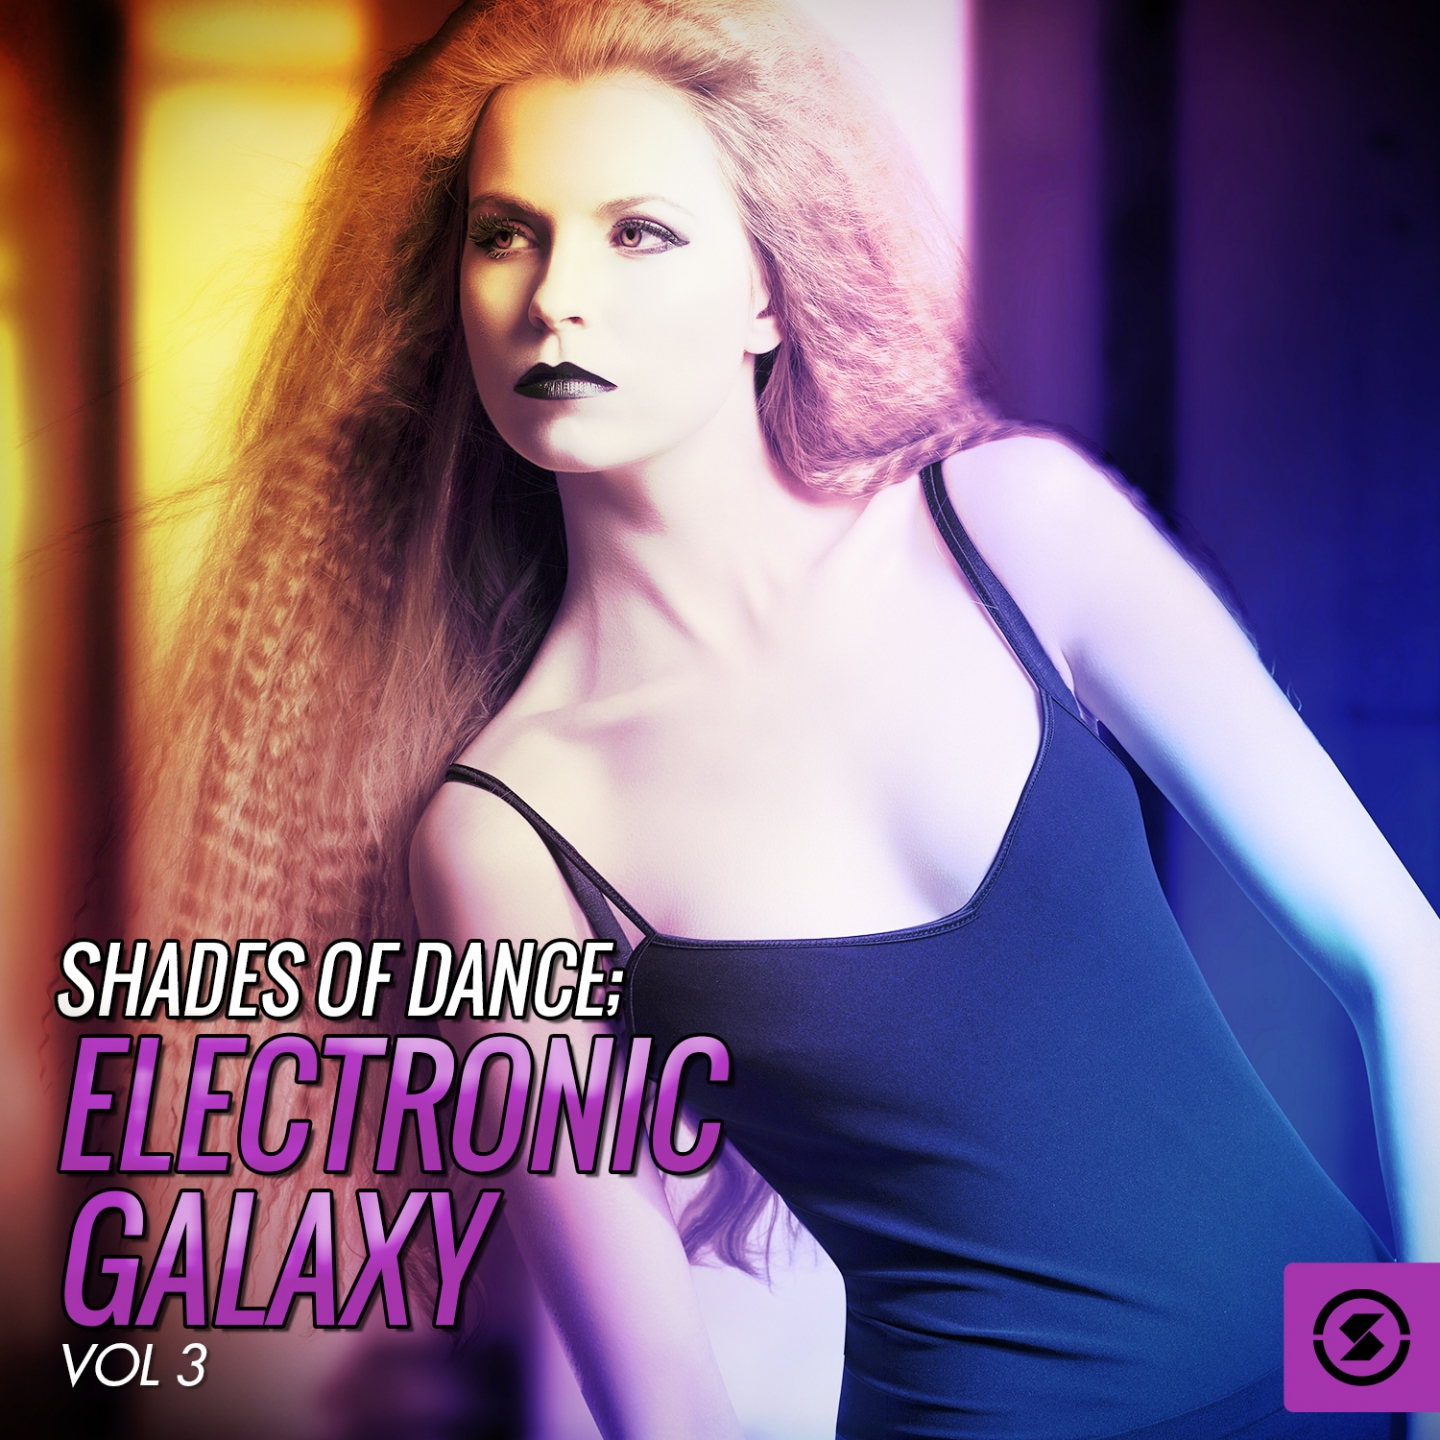 Shades of Dance: Electronic Galaxy, Vol. 3